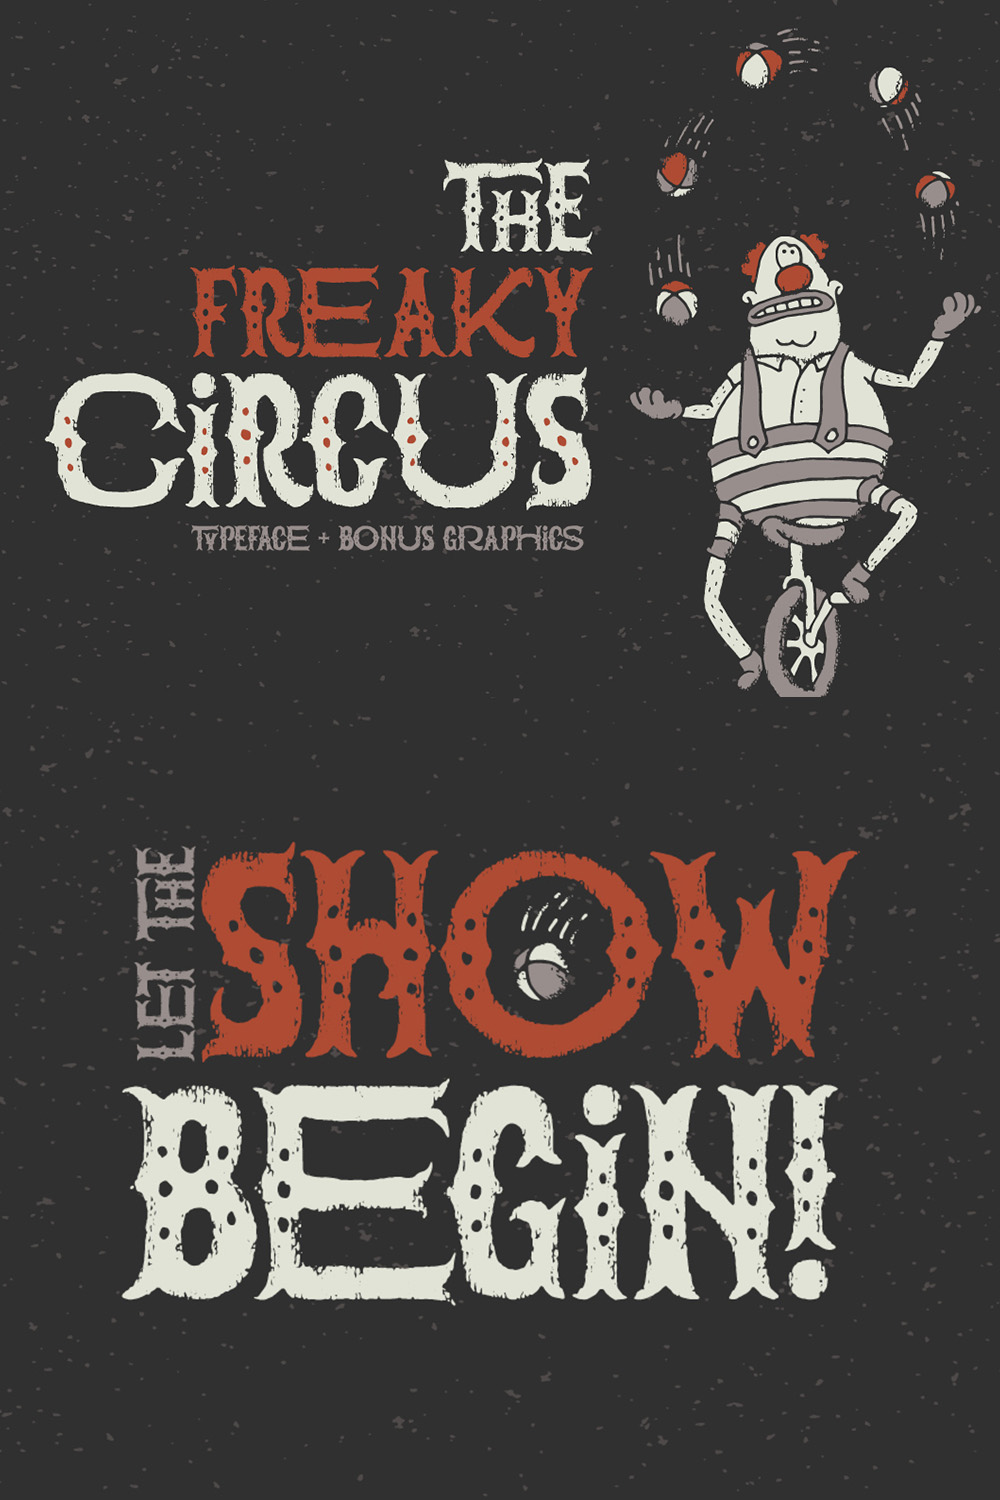 The Freaky Circus Font Pinterest Collage image.